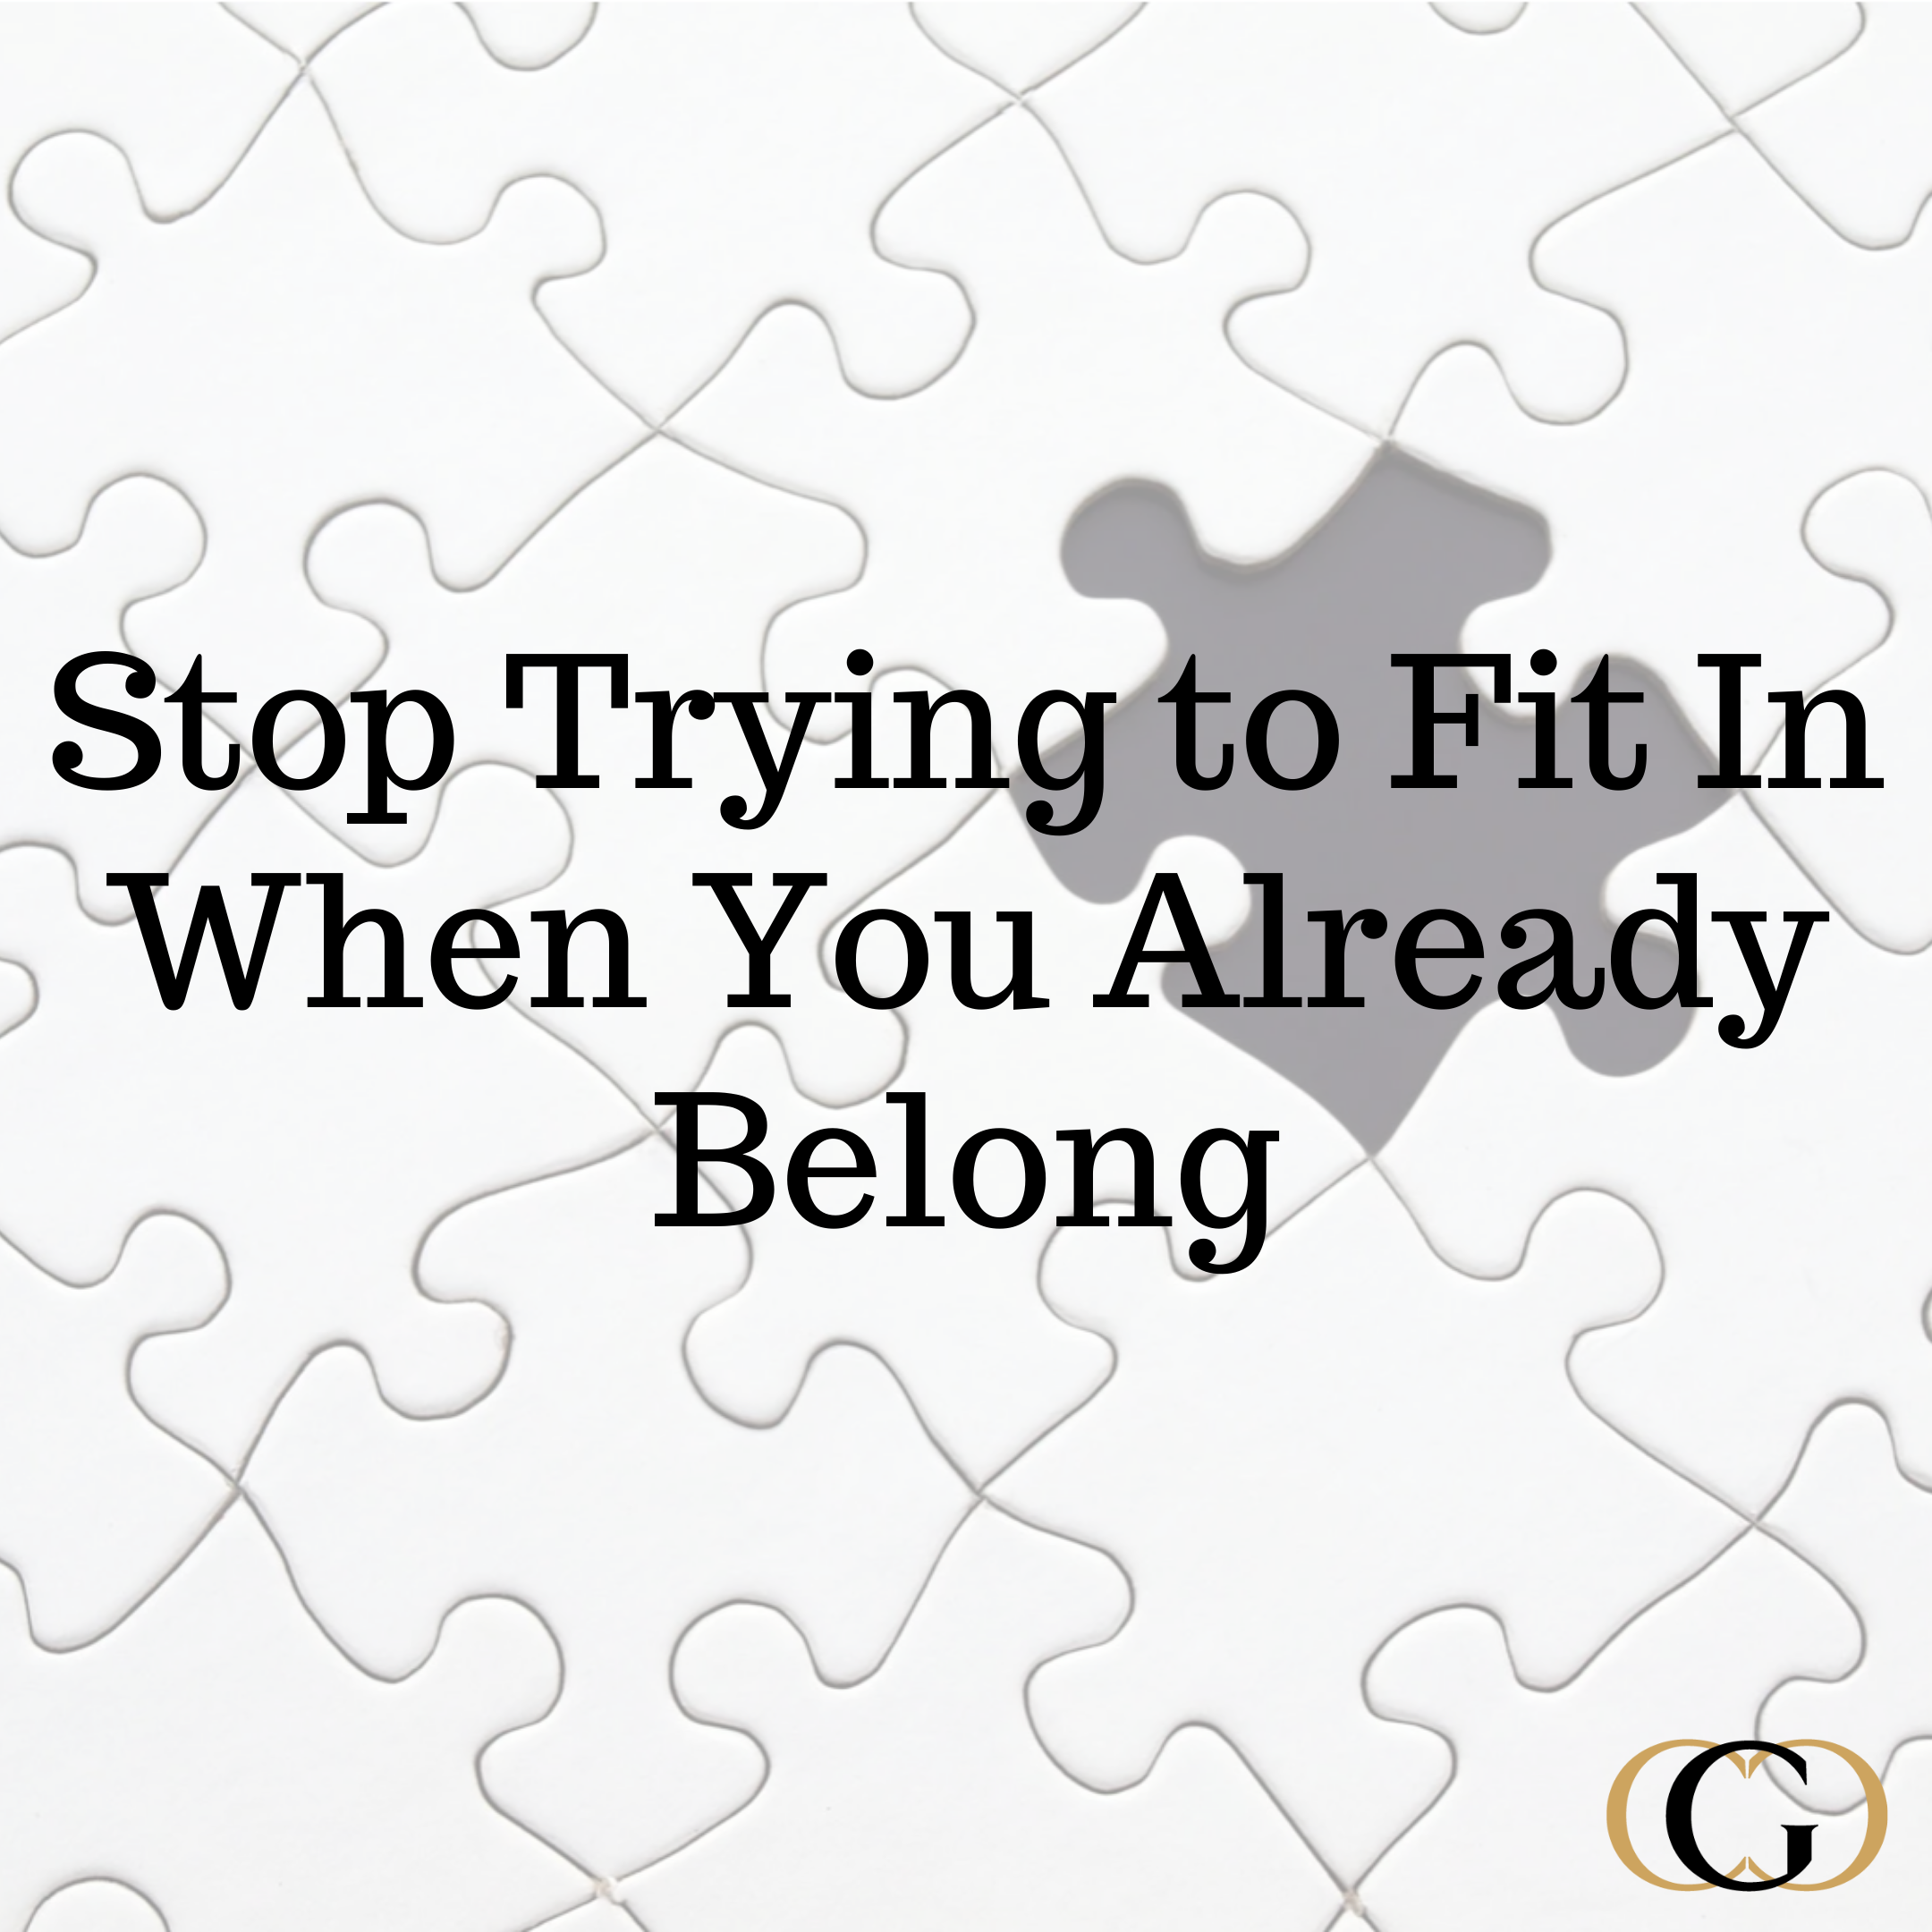 Stop Trying to Fit In When You Already Belong